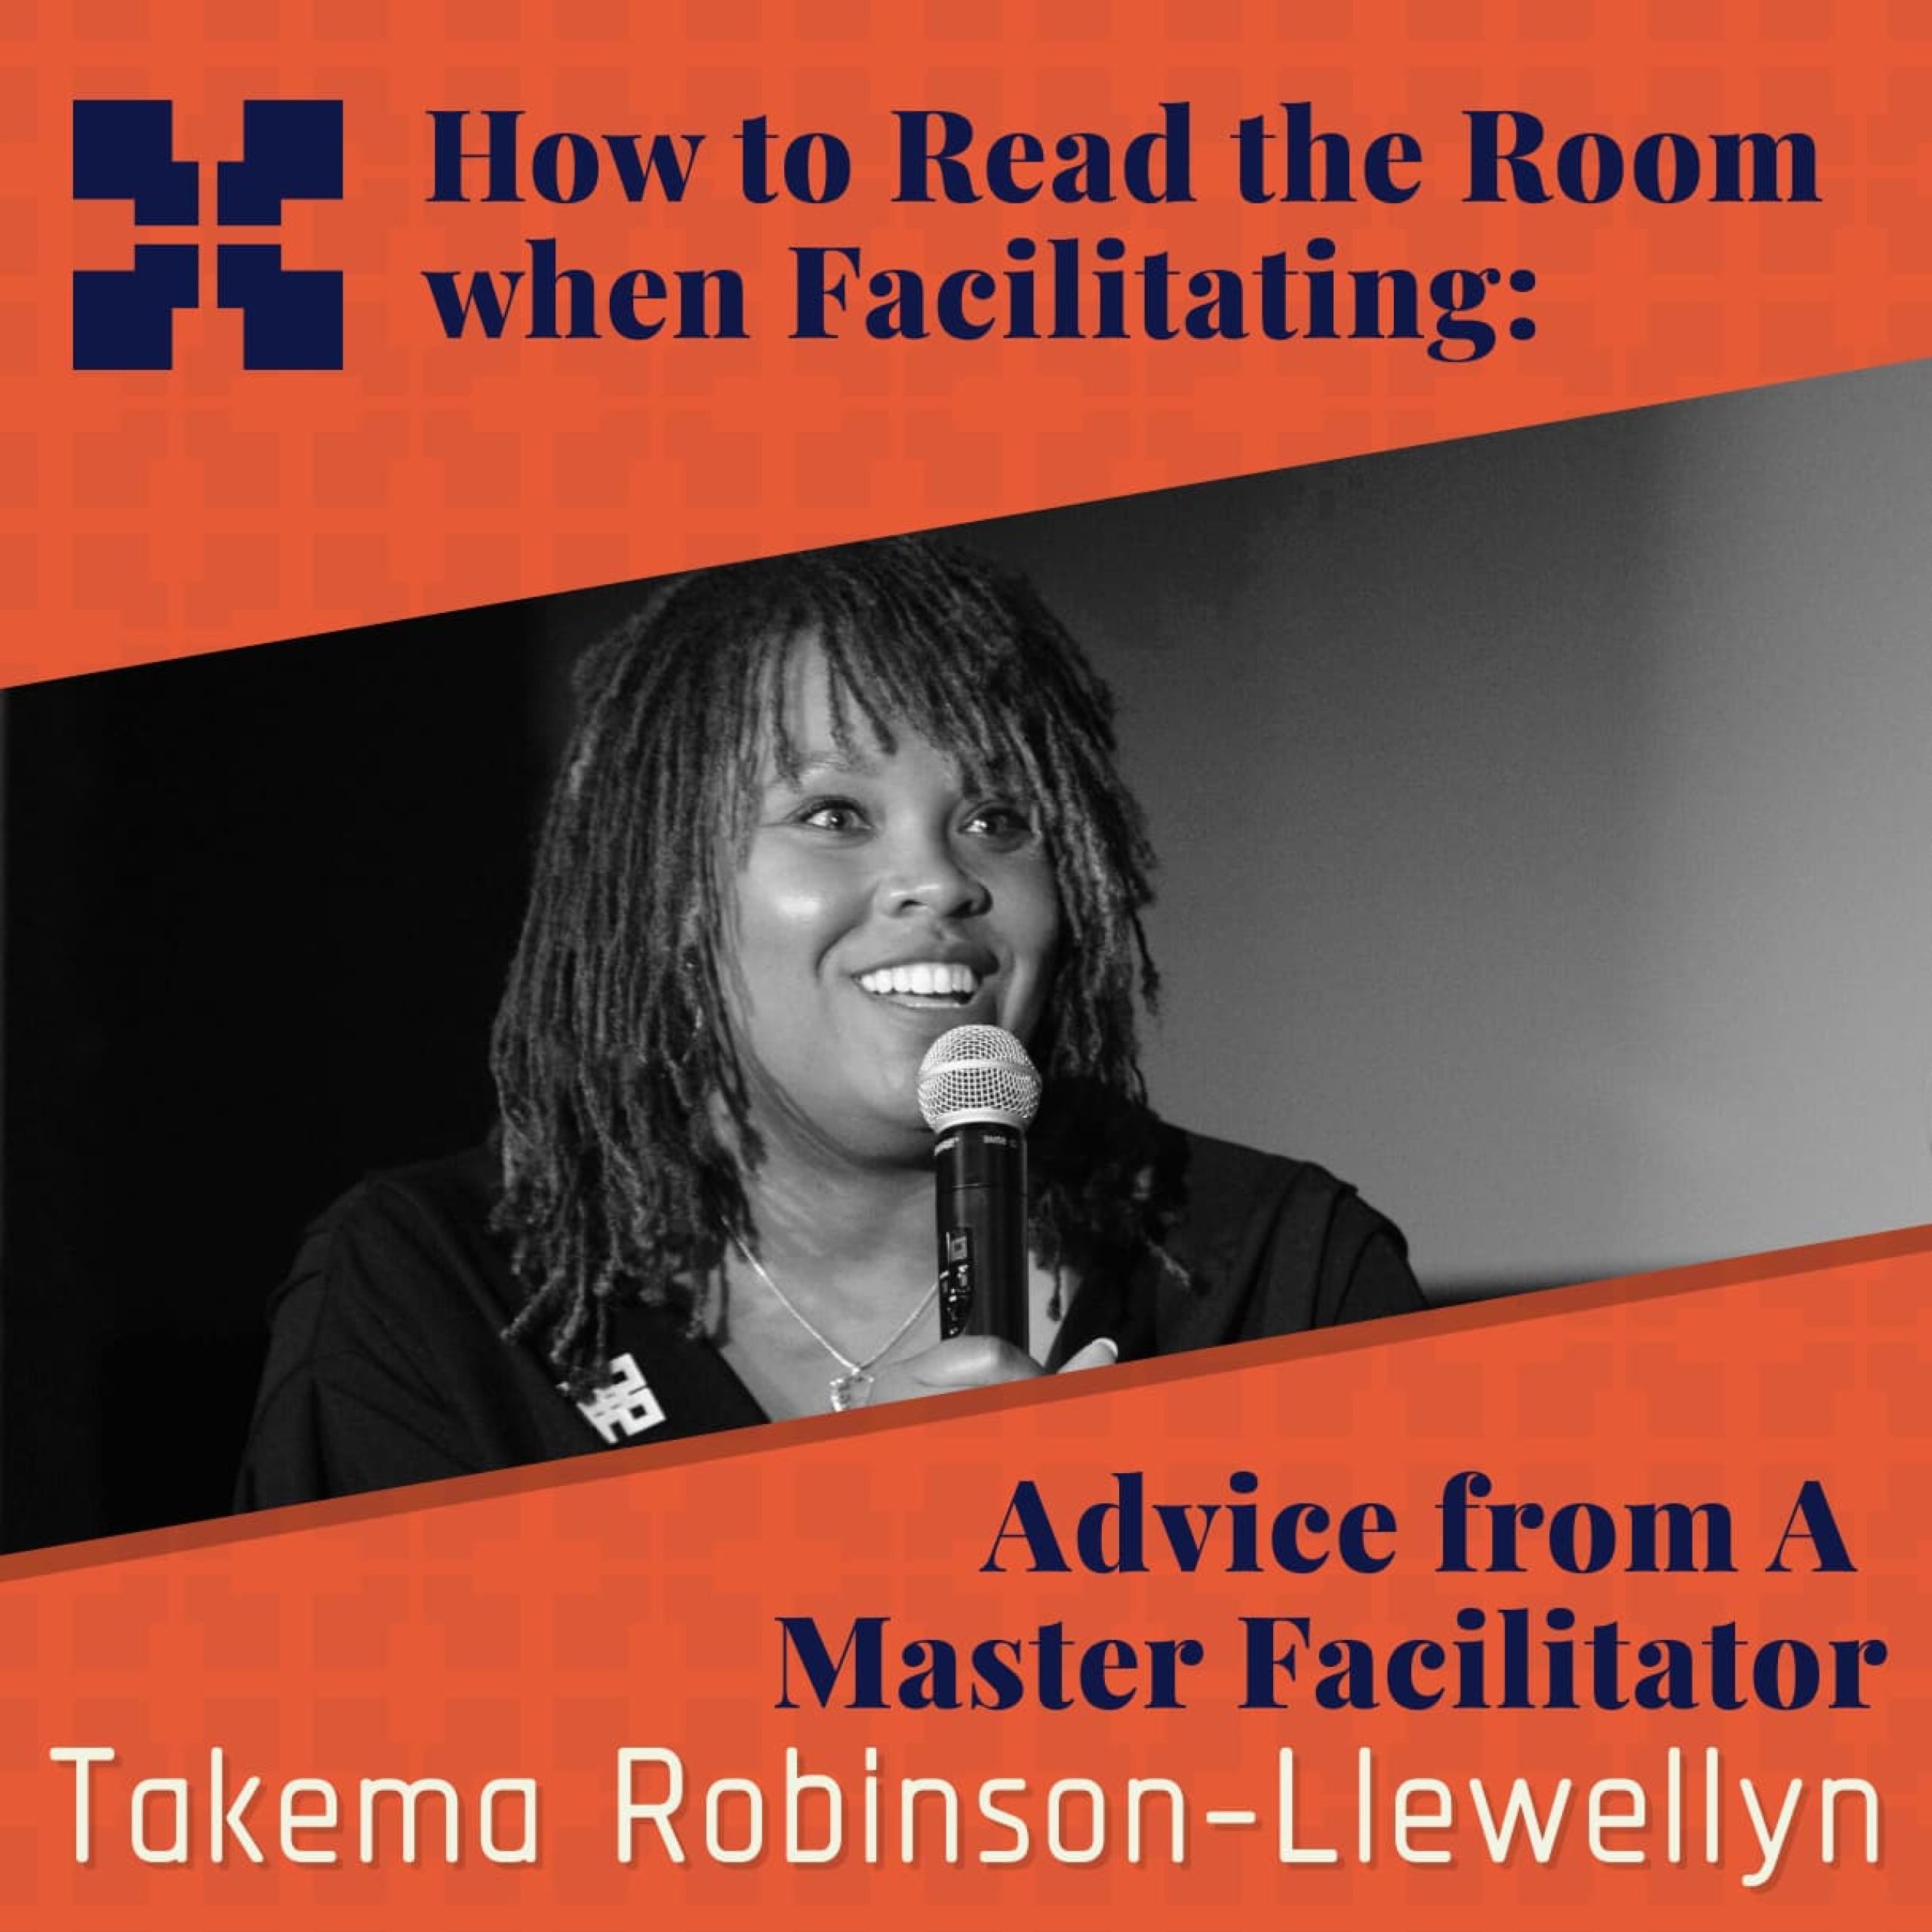 How to Read the Room when Facilitating: Advice from A Master Facilitator Takema Robinson-Llewellyn